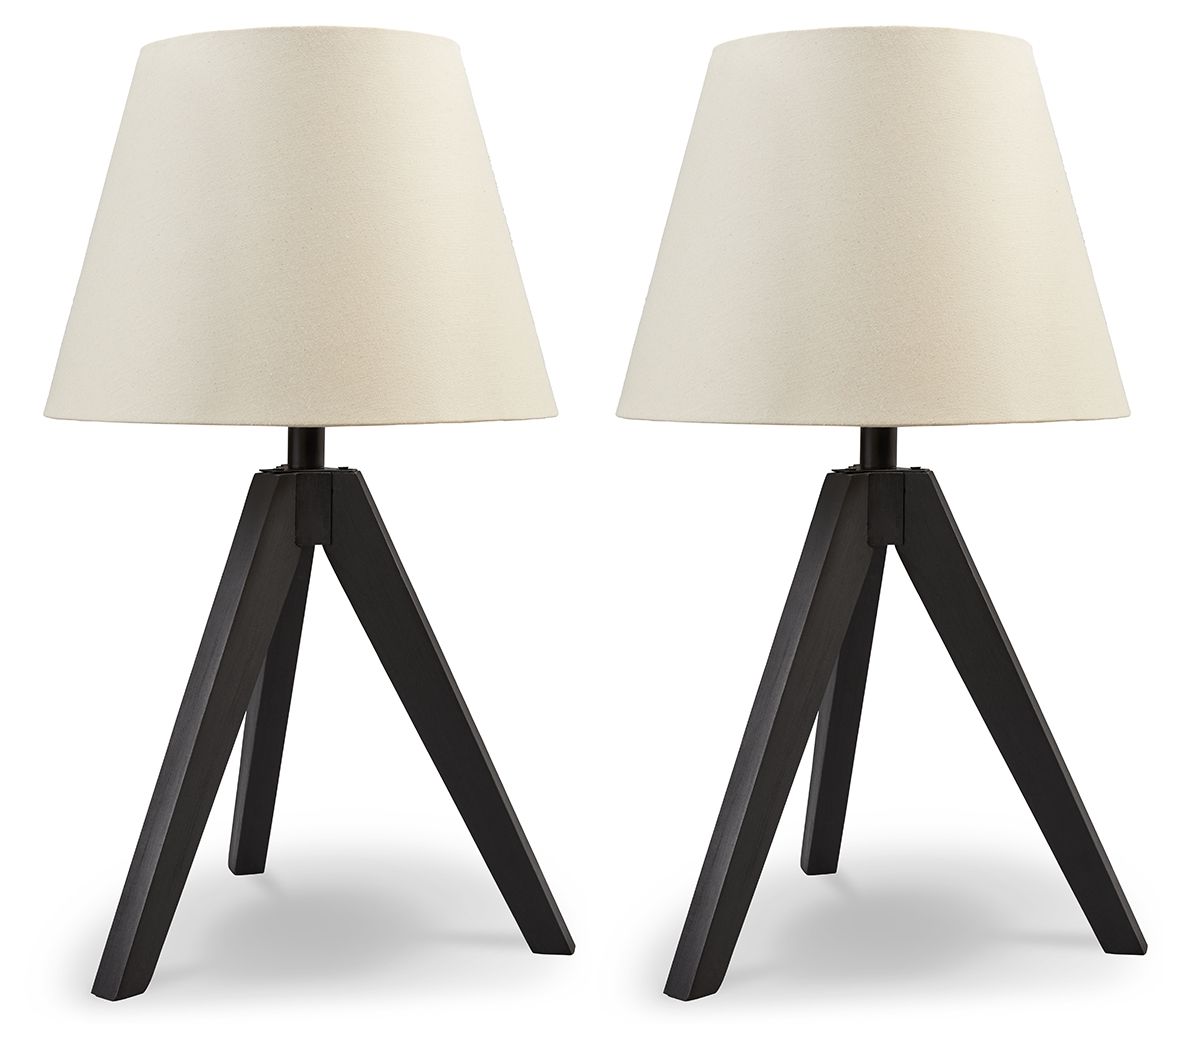 Laifland - Wood Table Lamp (Set of 2) - Tony's Home Furnishings